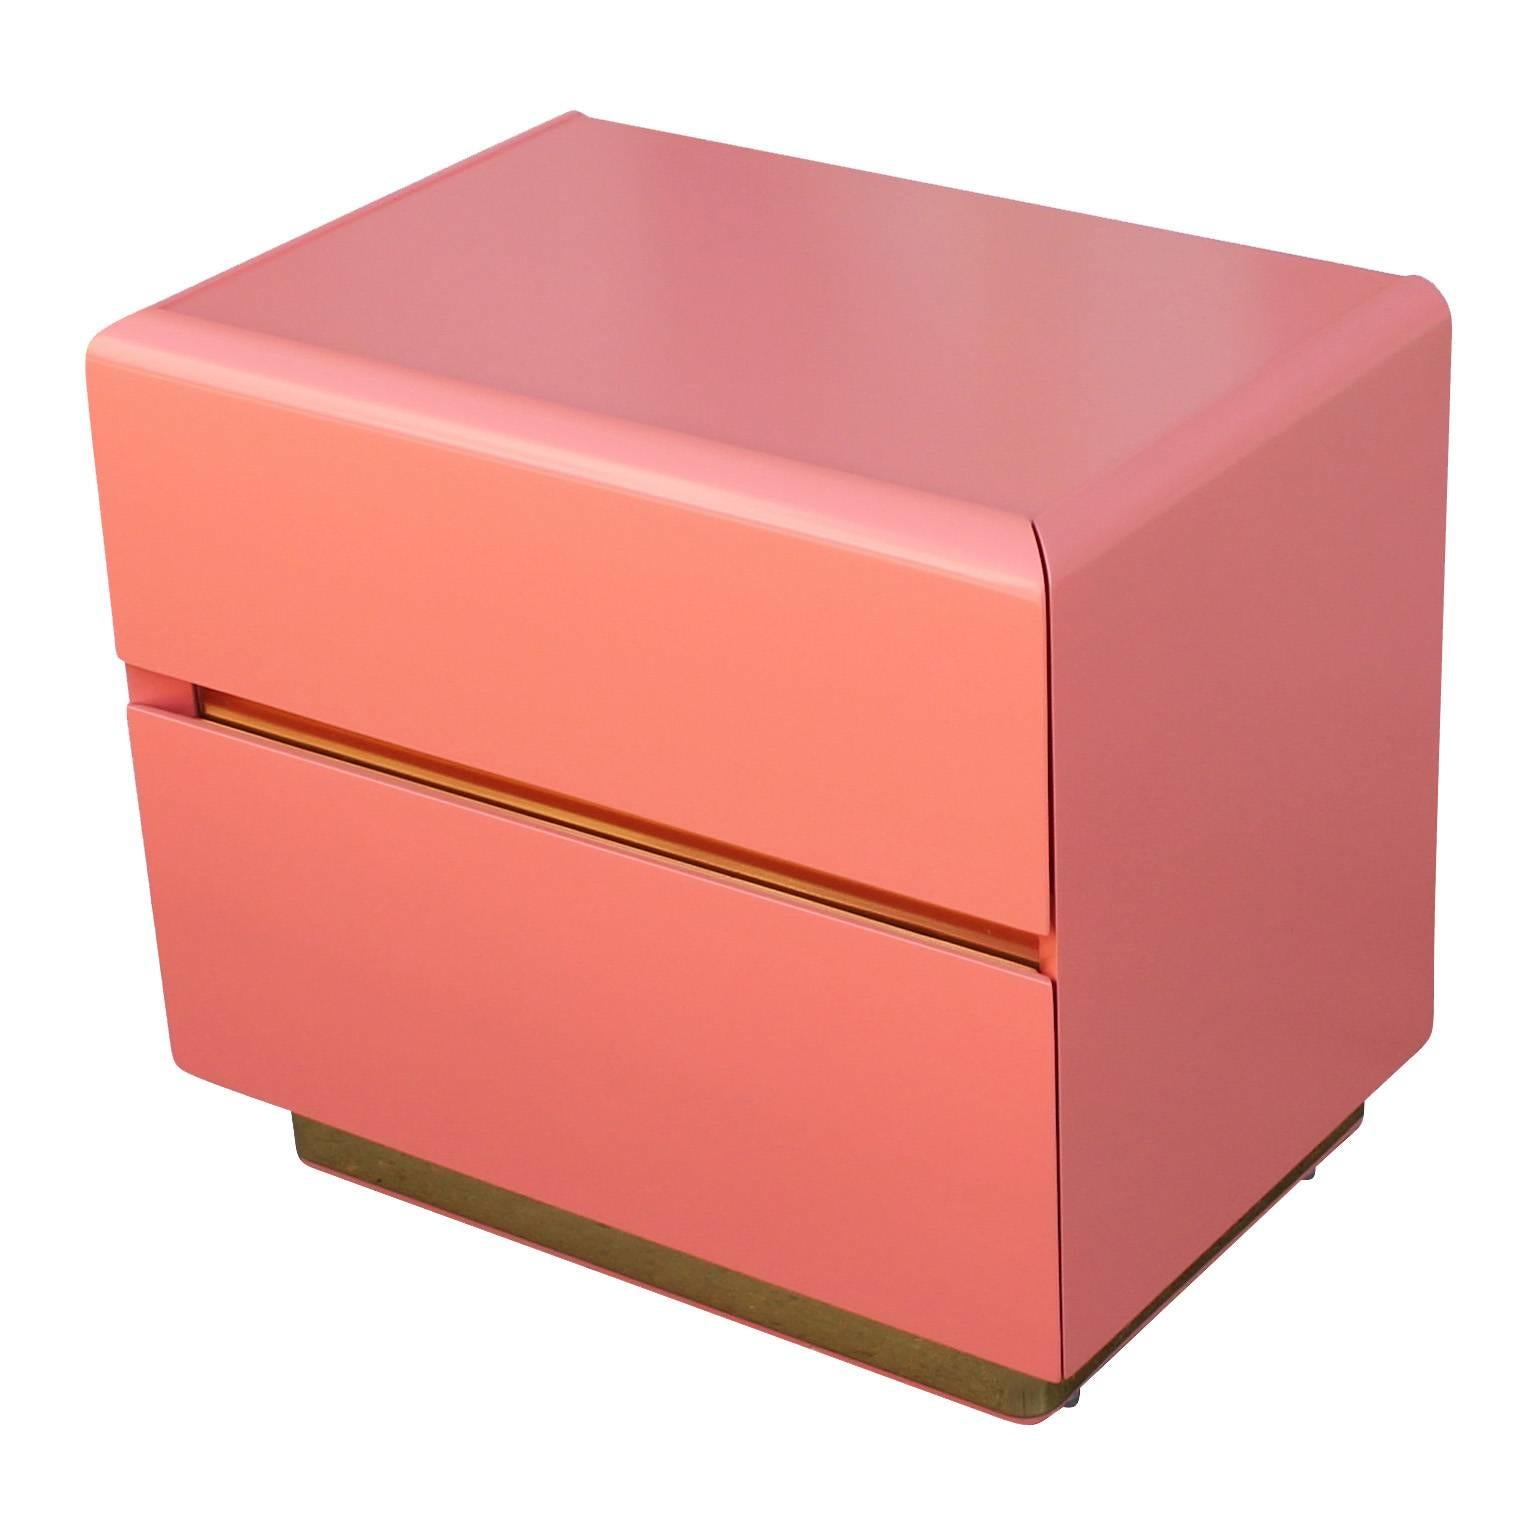 American Glamorous Pair of Coral Lacquer and Brass Nightstands